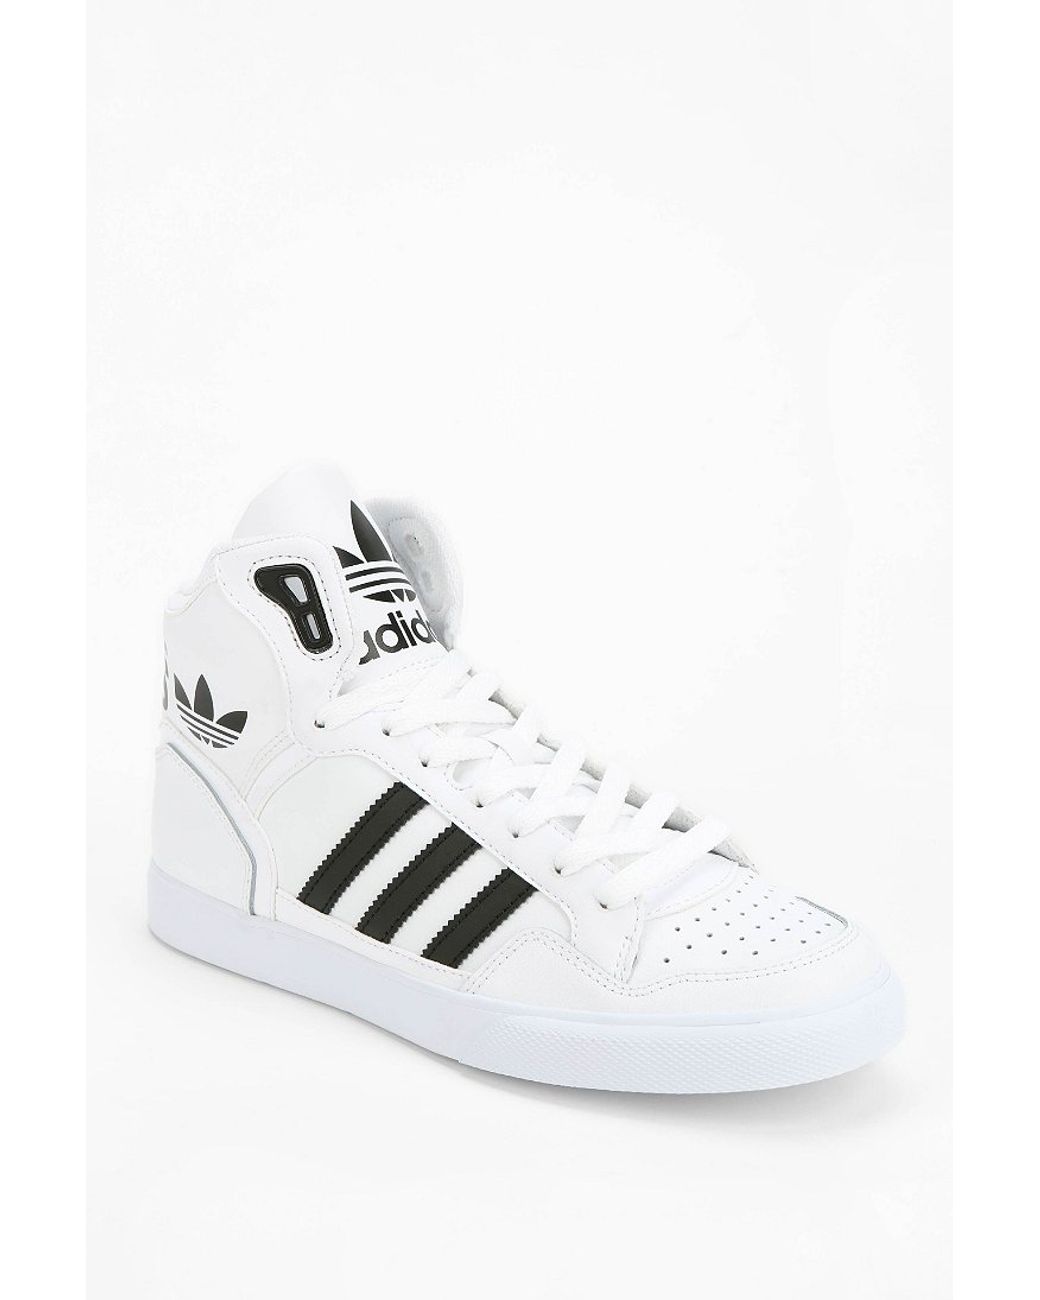 Originals Extaball Leather Hightop Sneaker in White | Lyst